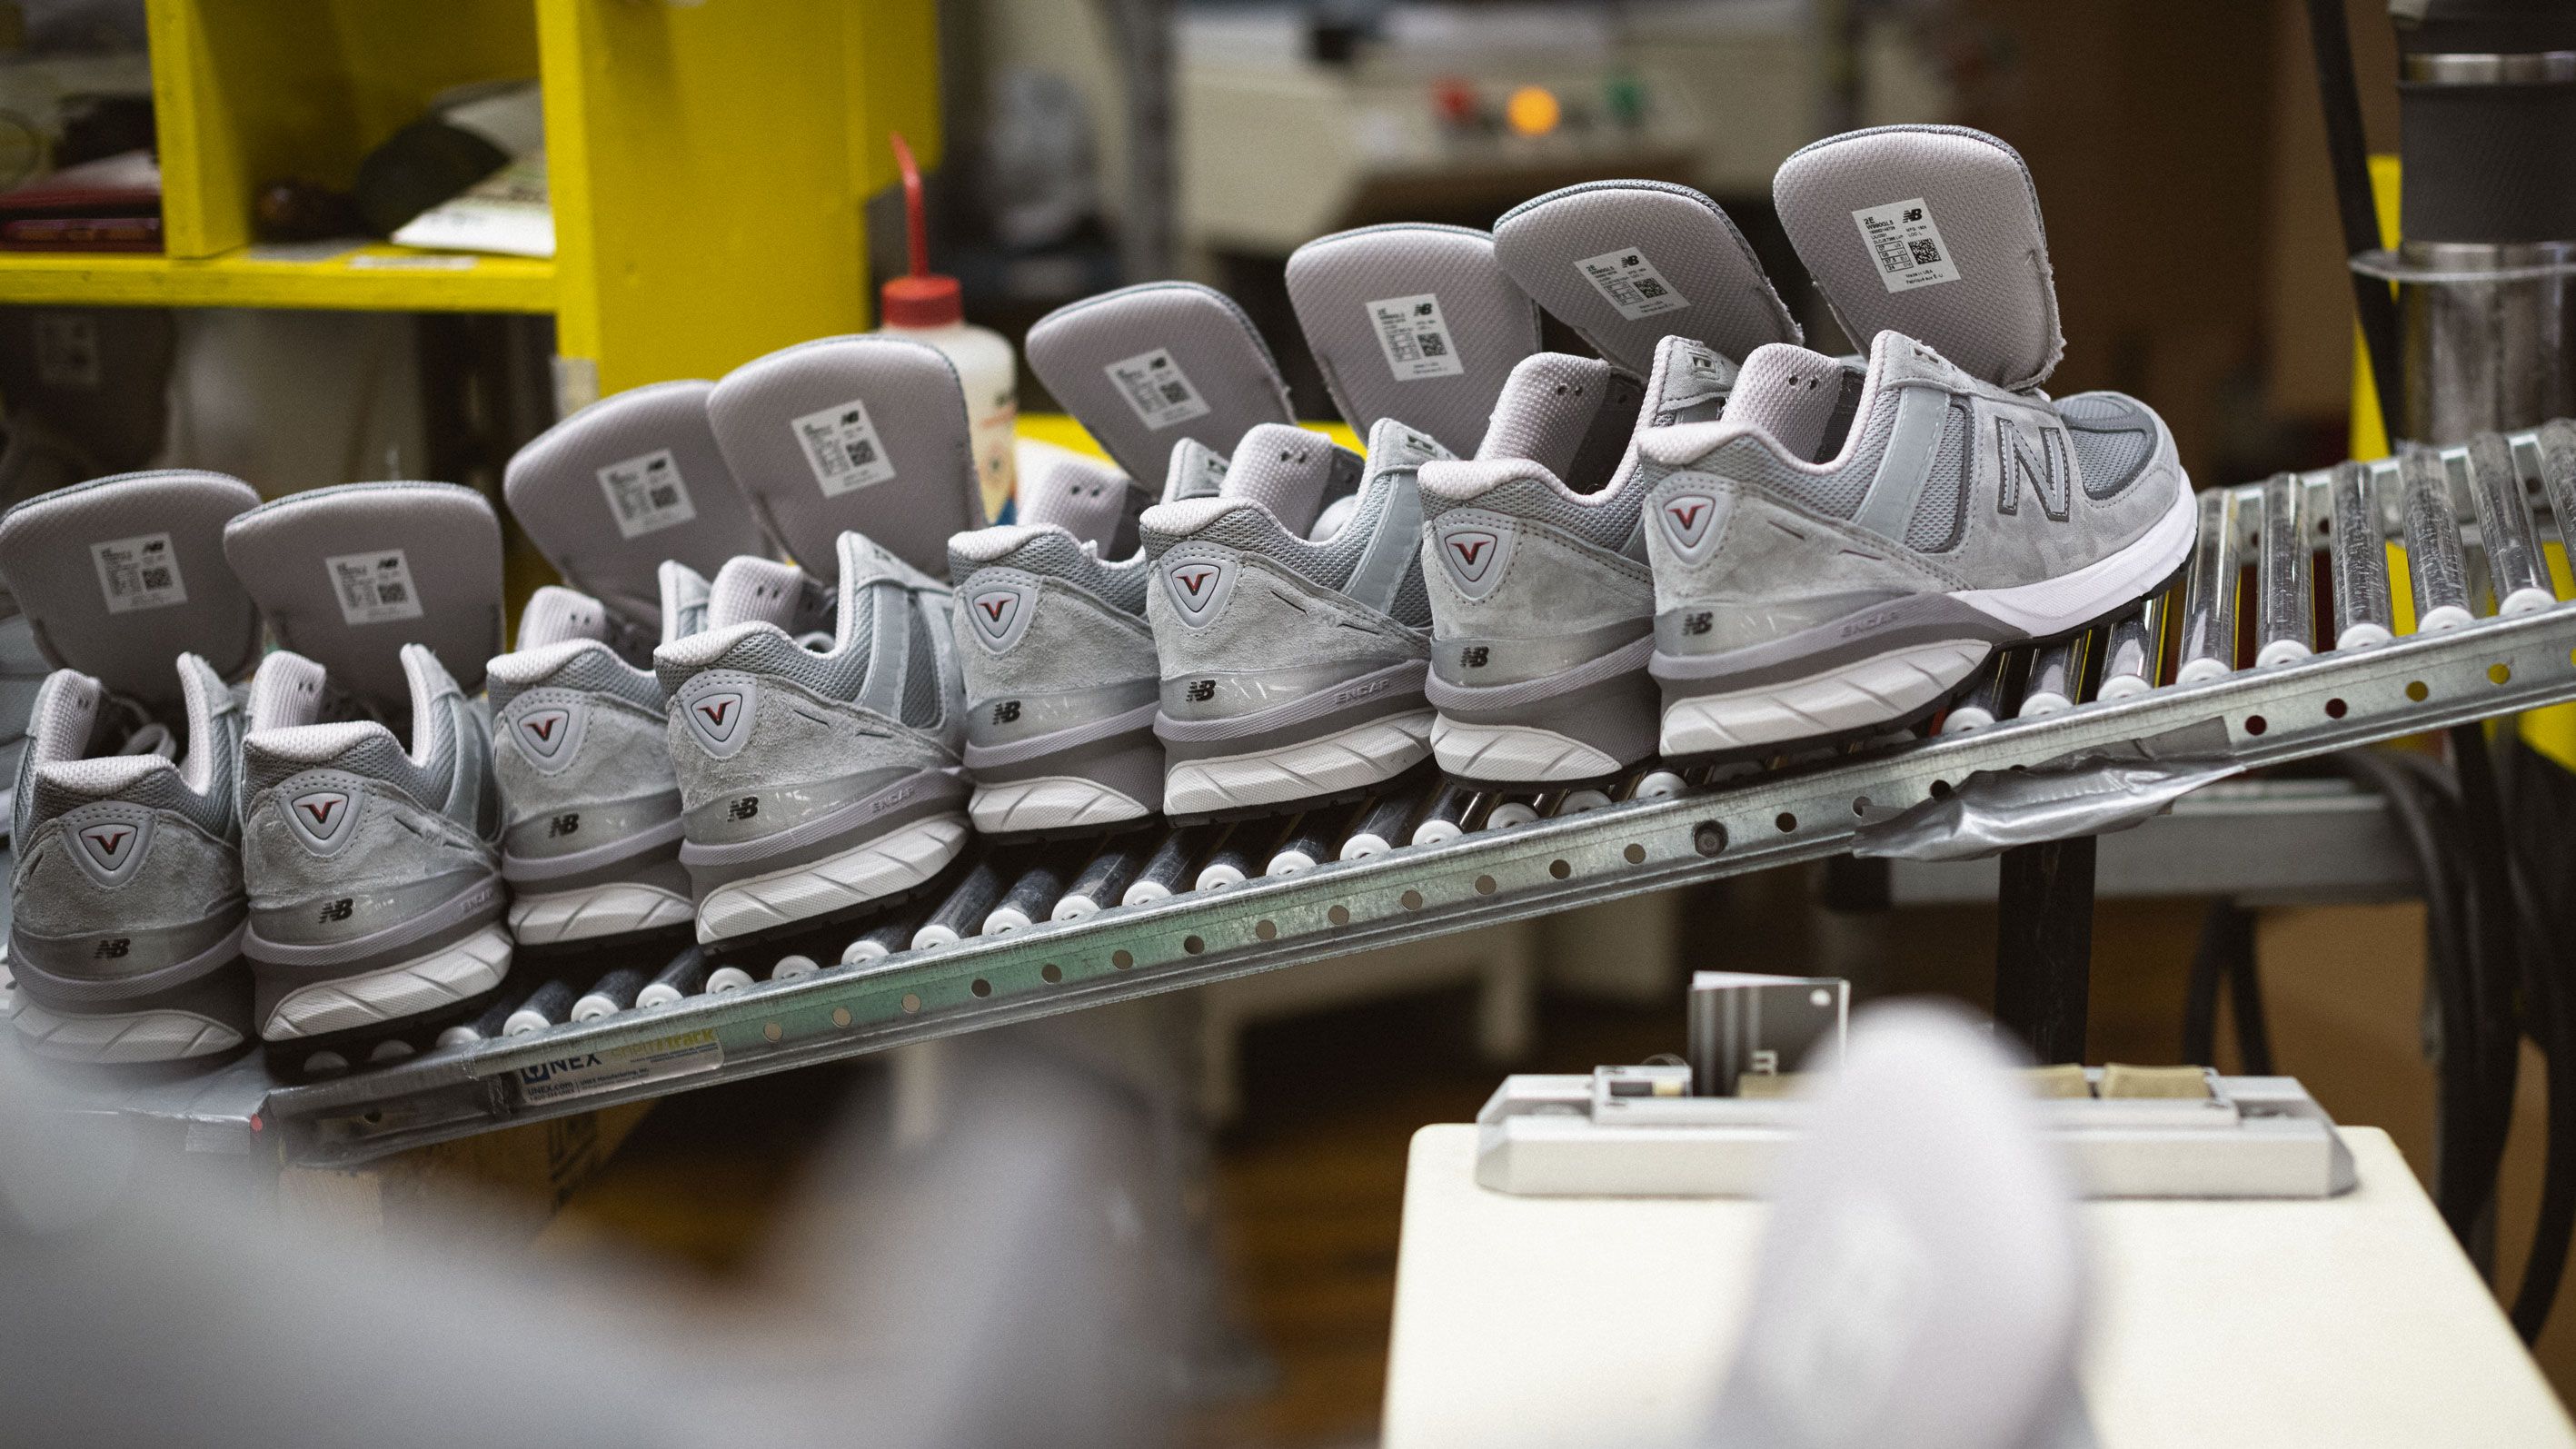 New Balance Factory Tour | How Are New Balance Shoes Made?